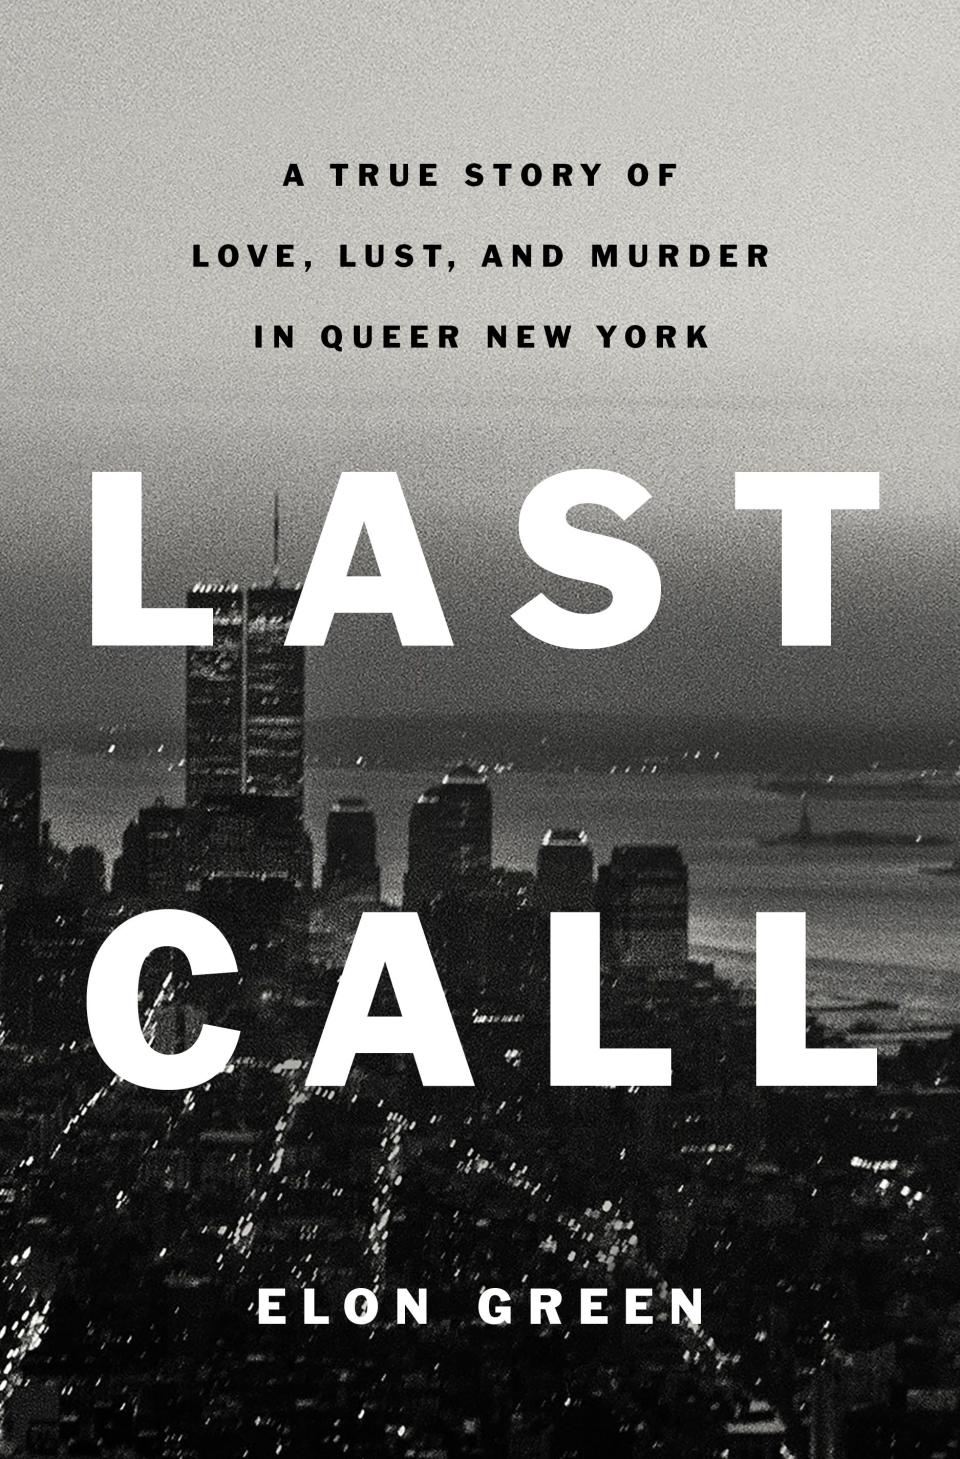 The cover of  "Last Call" by Elon Green.